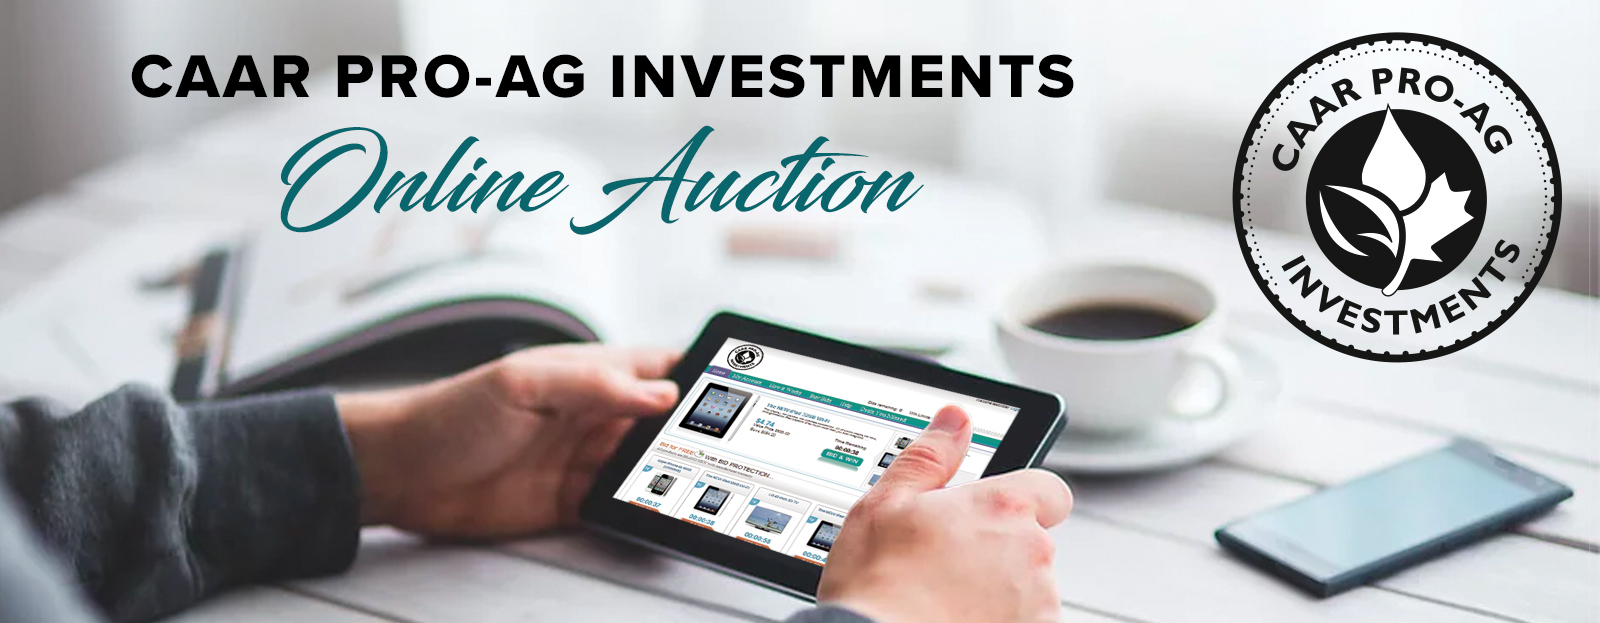 Banner of CAAR Pro Ag Investments Online Auction